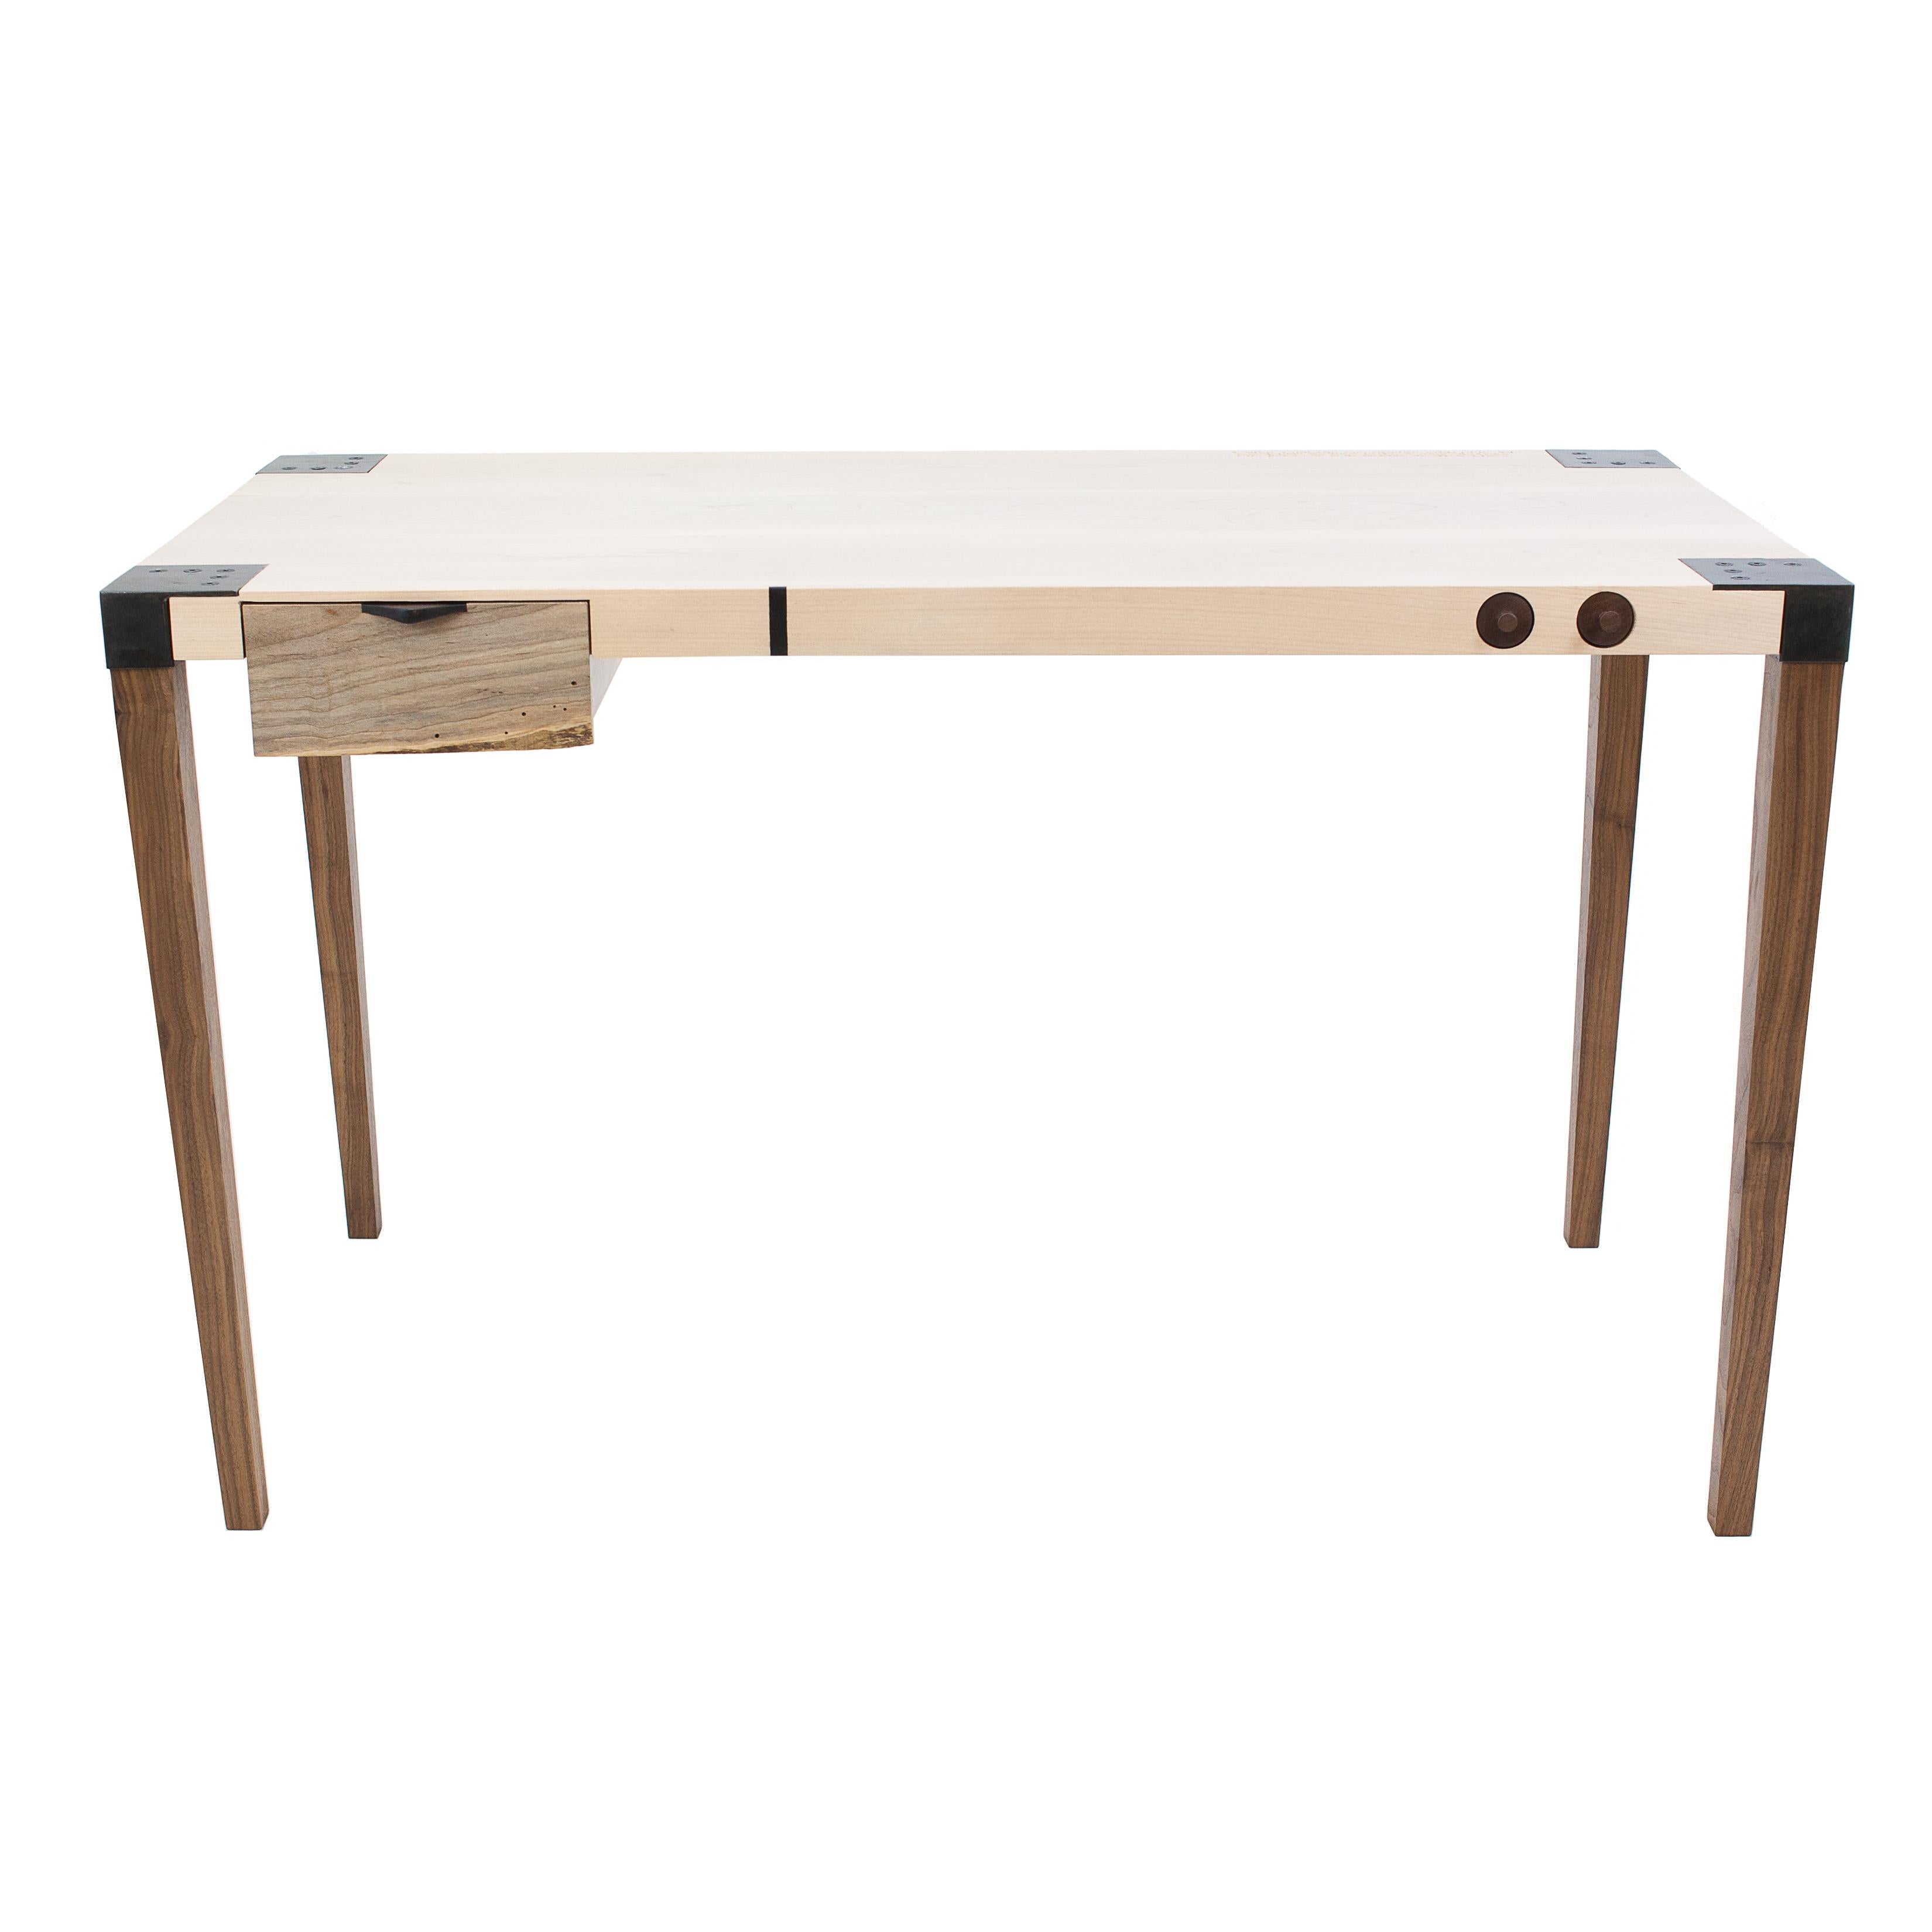 This writer's desk is an exercise in restraint. This sleek desk’s tapered legs are made from solid Walnut and are detachable thanks to the custom blackened steel joinery. The solid wood top of this fully customizable piece features inlays and/or